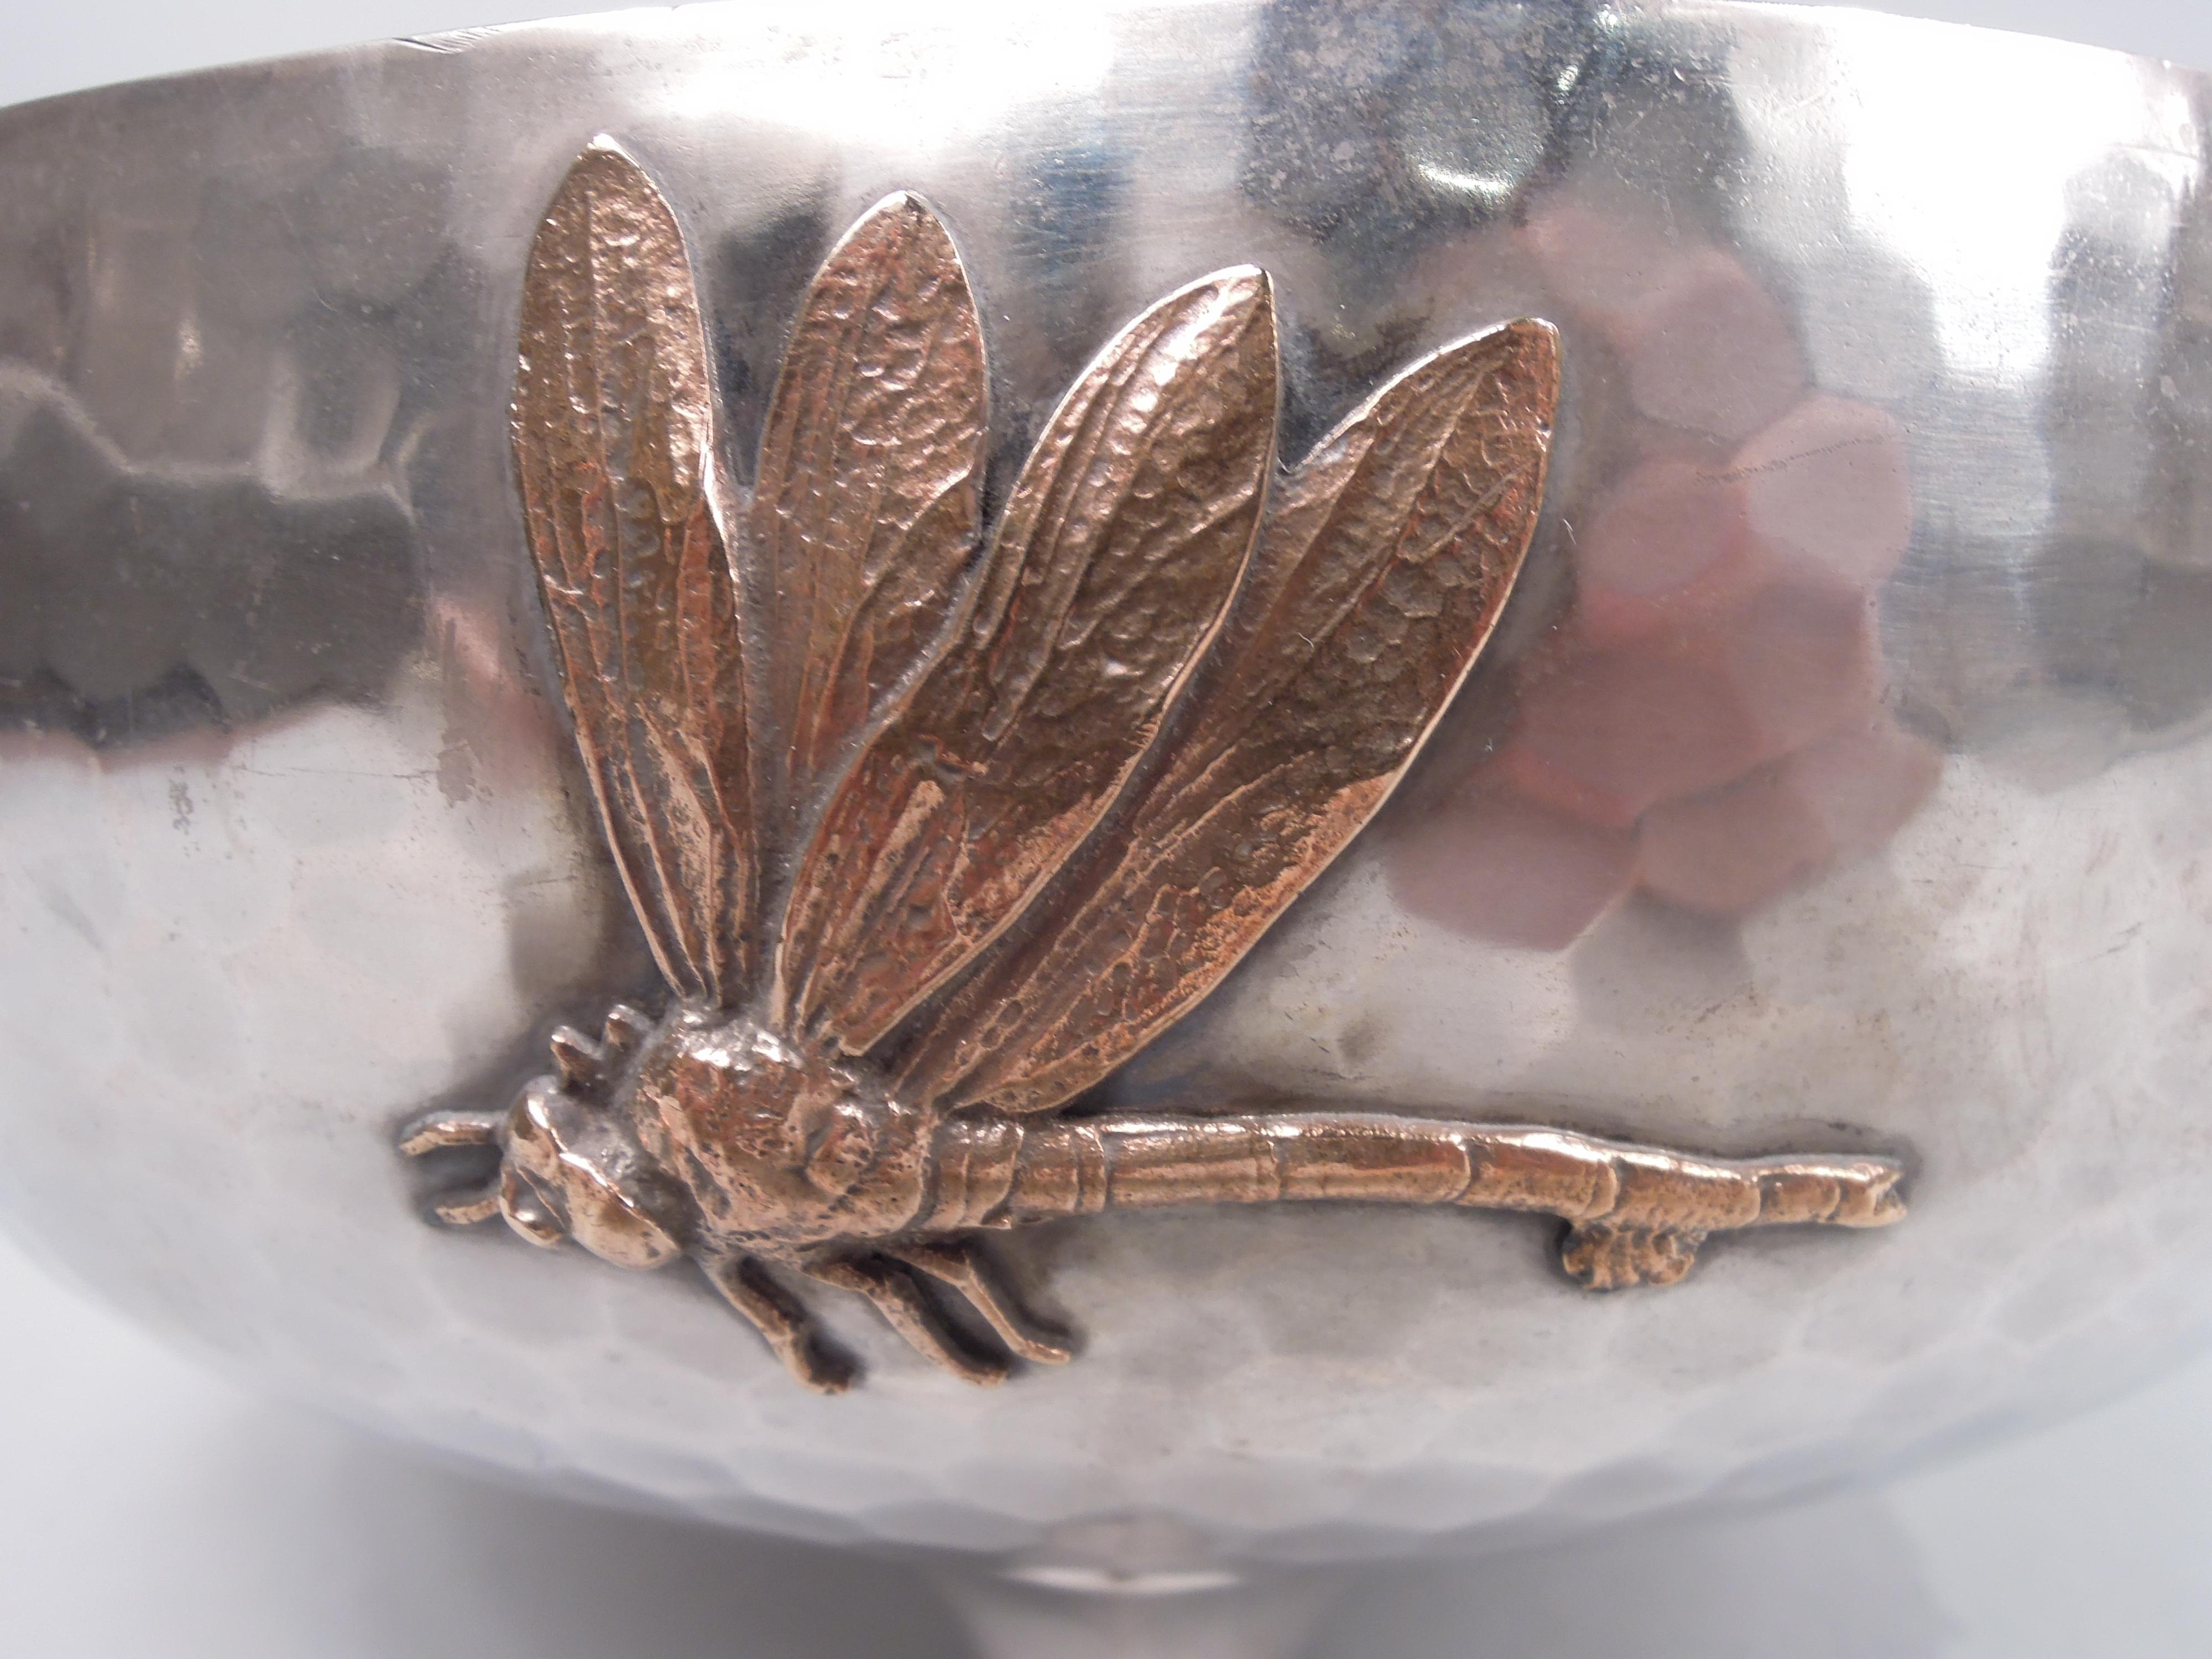 Gorham Japonesque Hand-Hammered Mixed Metal Dragonfly Bowl, 1883 For Sale 2